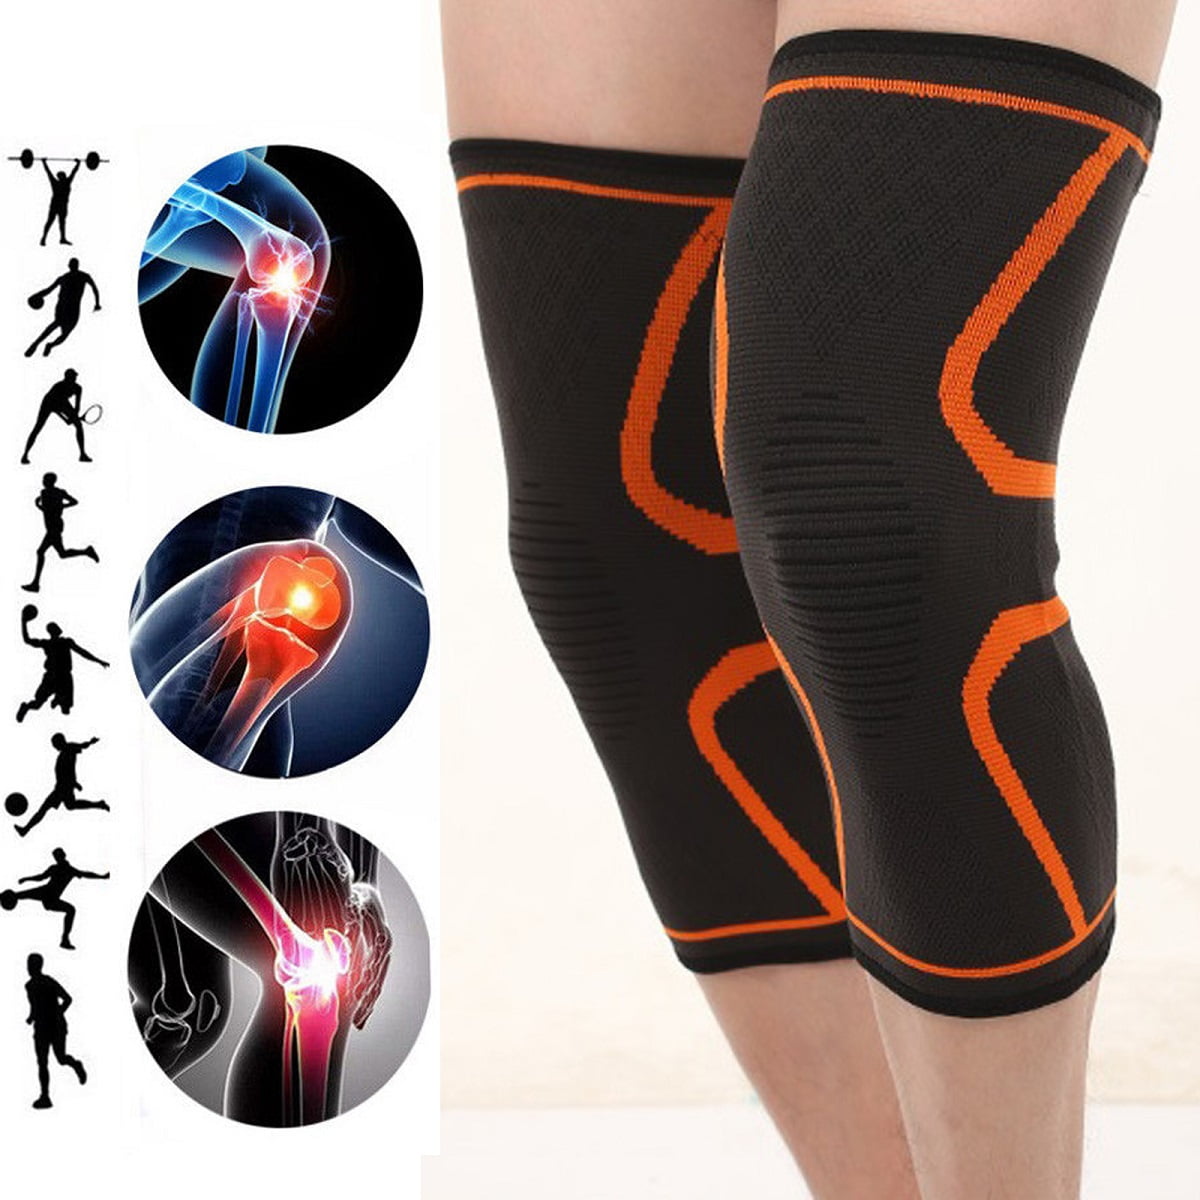 and Arthritis Relief Workout Exercise Copper Knee Brace for Arthritis Pain and Support-Copper Knee Sleeve Compression for Sports